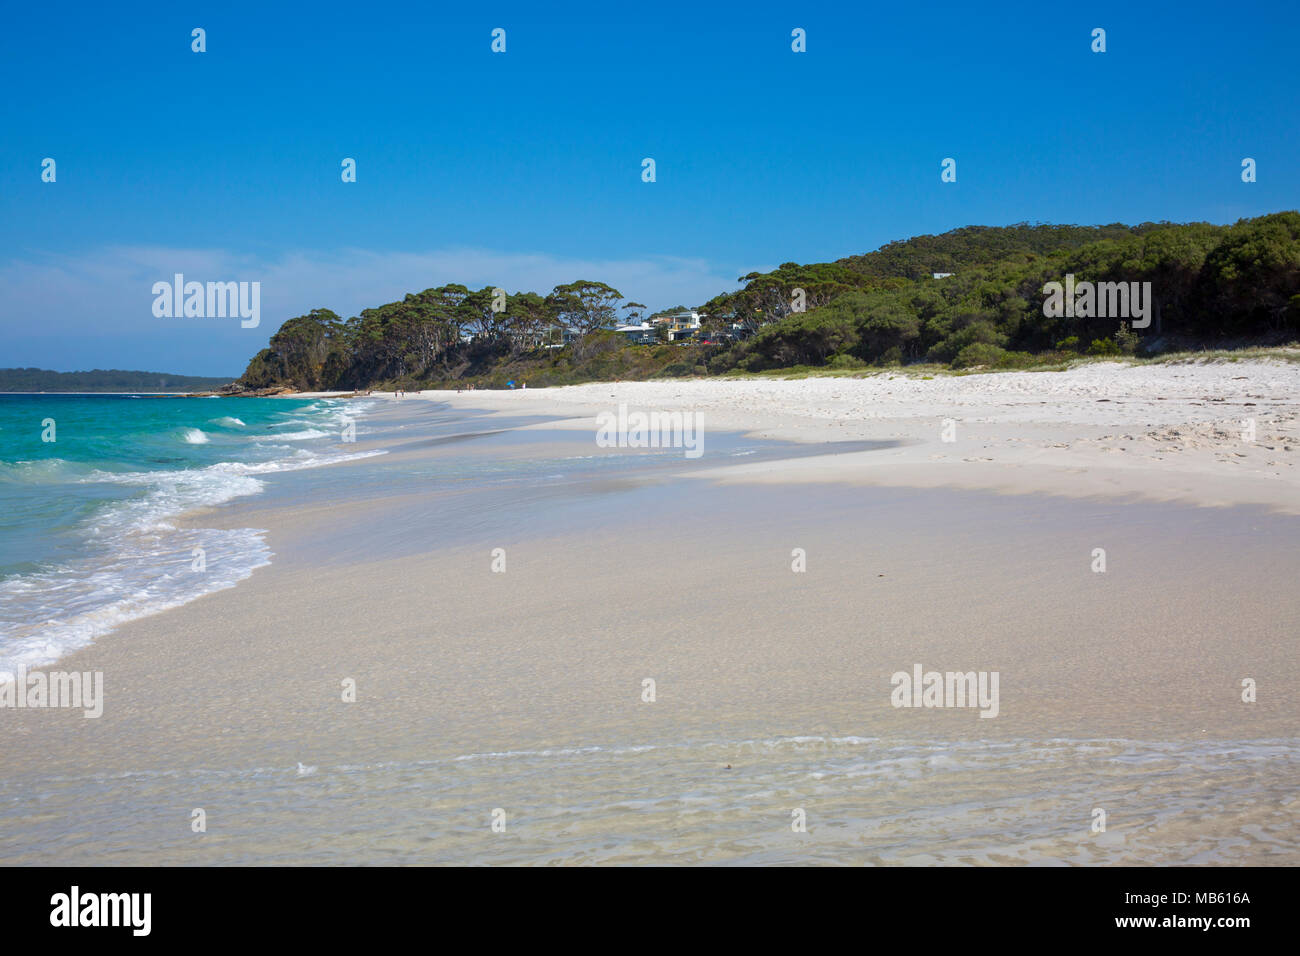 Chinamans Strand Teil des White Sands, Jervis Bay, New South Wales, Australien Stockfoto